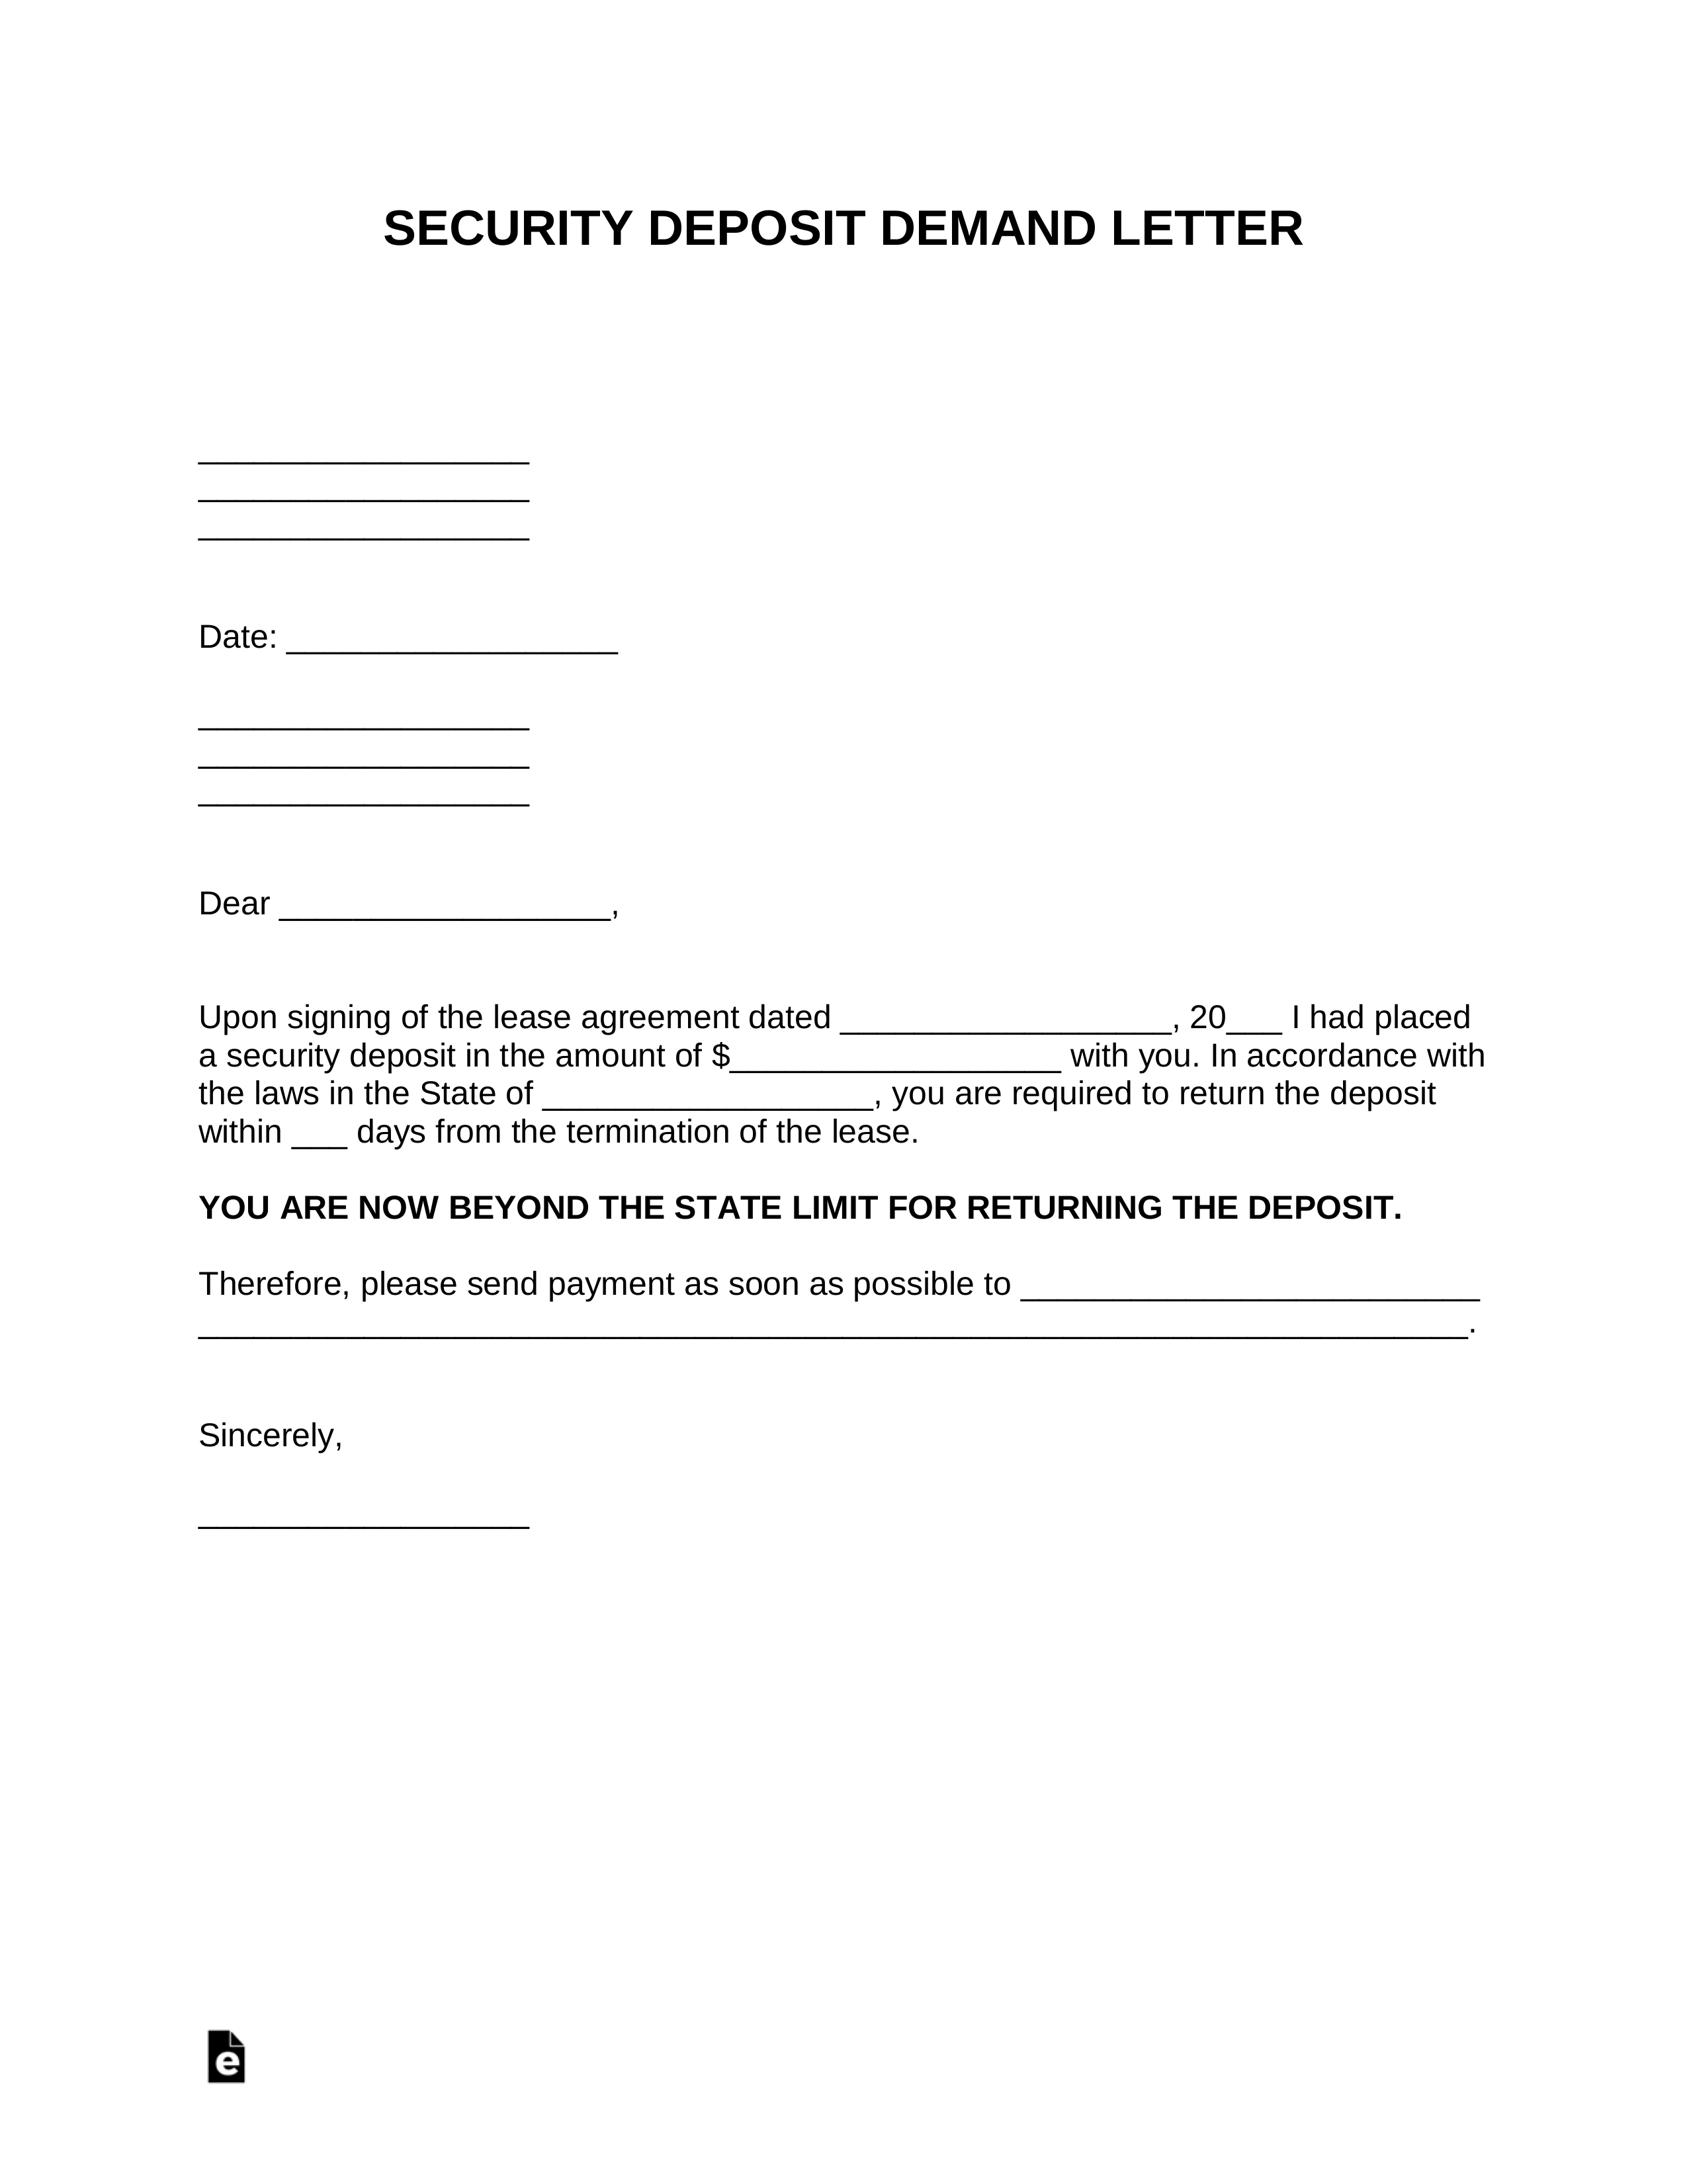 Free Security Deposit Demand Letter Template - PDF  Word – eForms With Regard To Request For Return Of Security Deposit Form With Request For Return Of Security Deposit Form